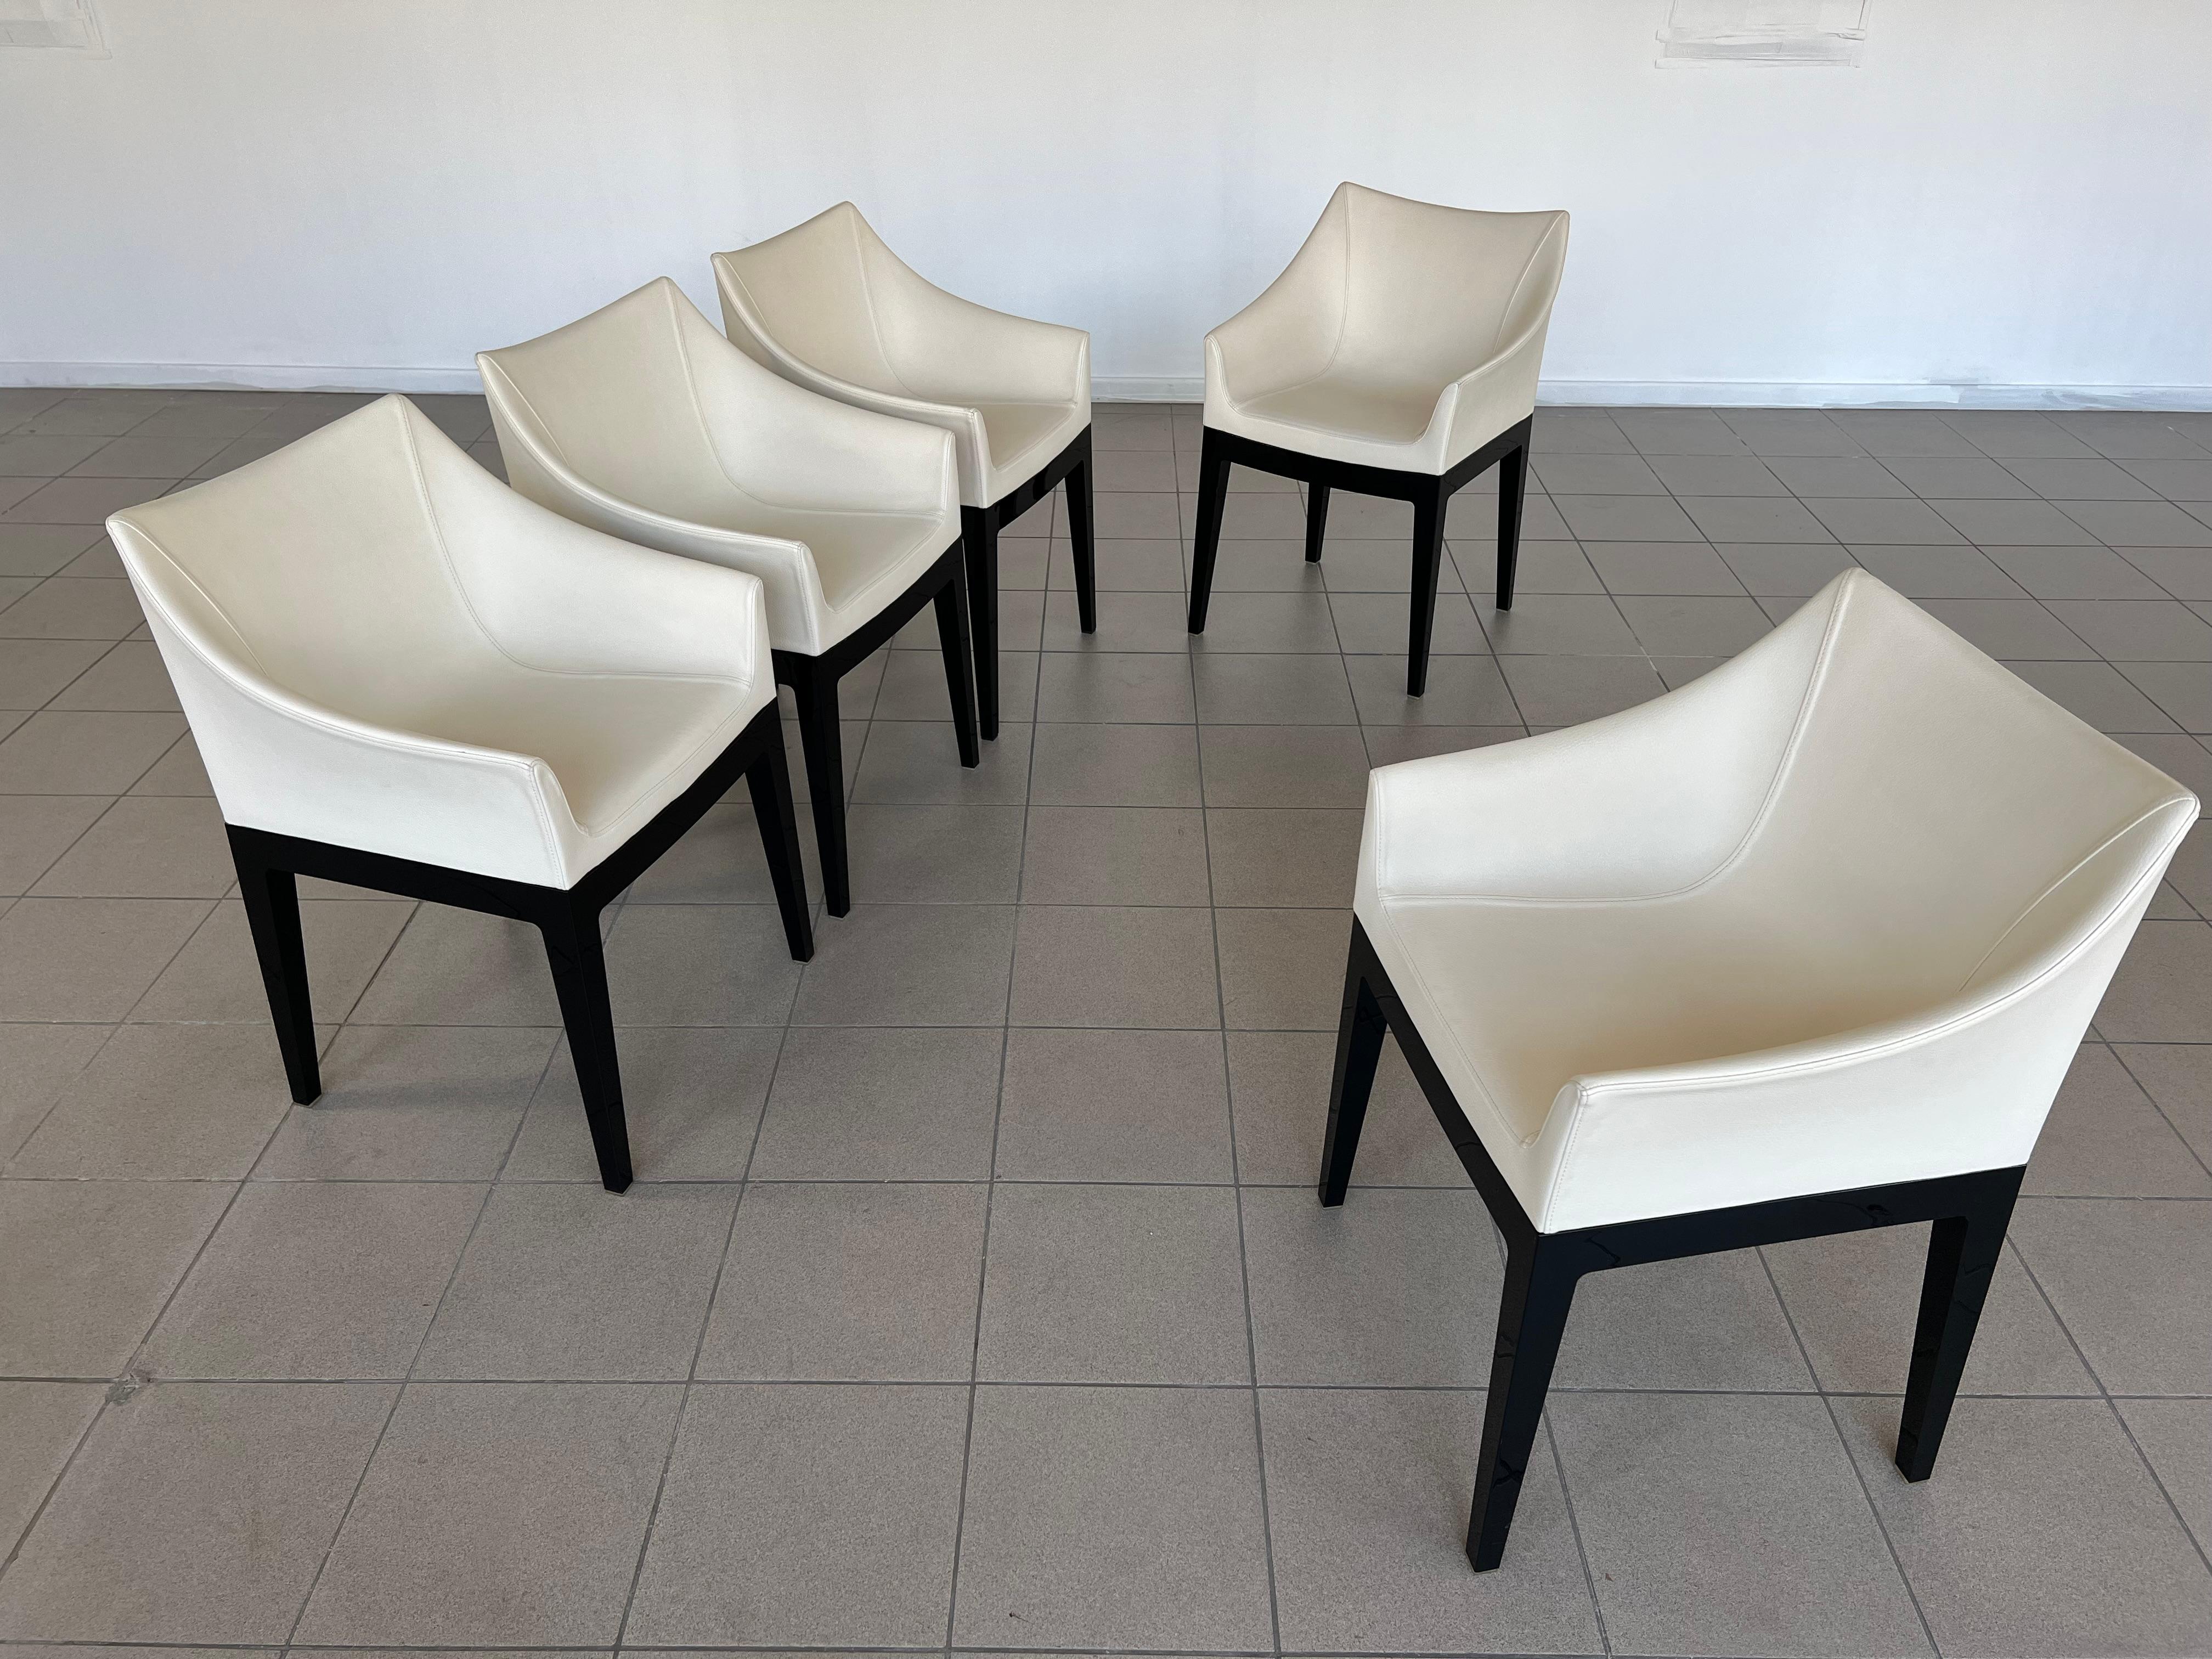 Original Mademoiselle Leather Chairs by Philippe Starck for Kartell - Set of 5 For Sale 4